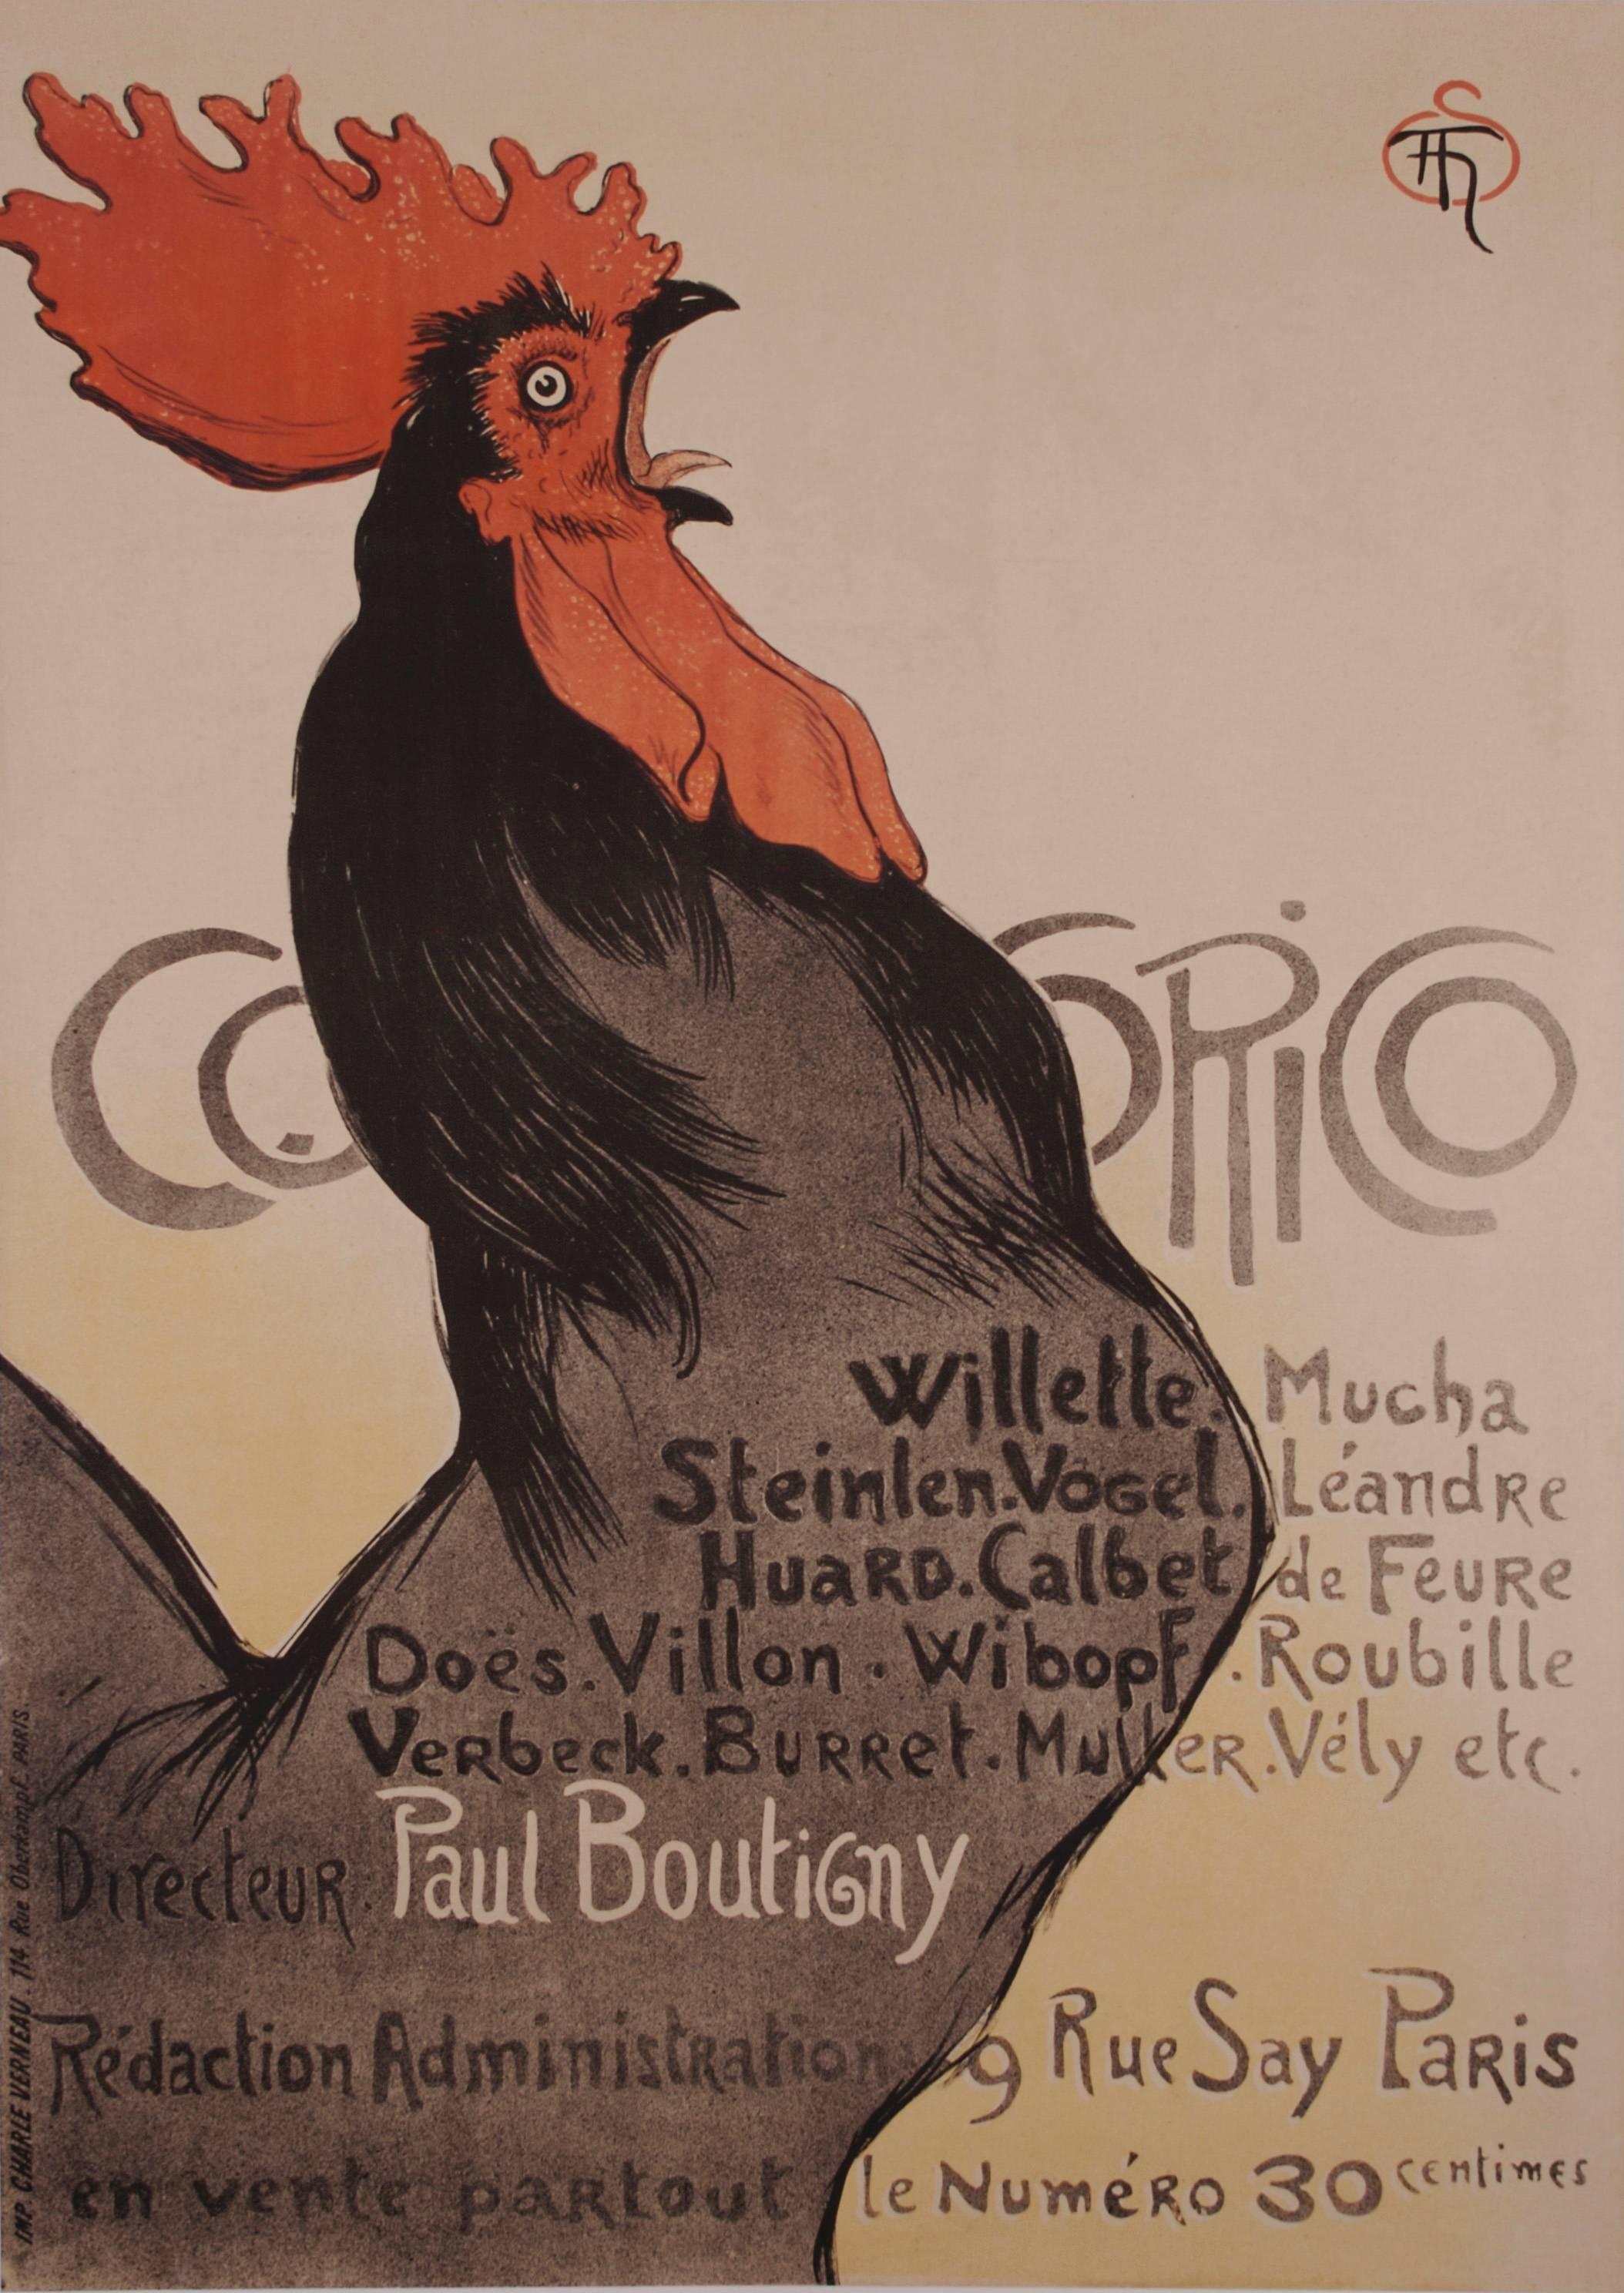 French Turn of the Century Stone Lithograph by Theophile Steinlen, 1899 - Art by Théophile Alexandre Steinlen